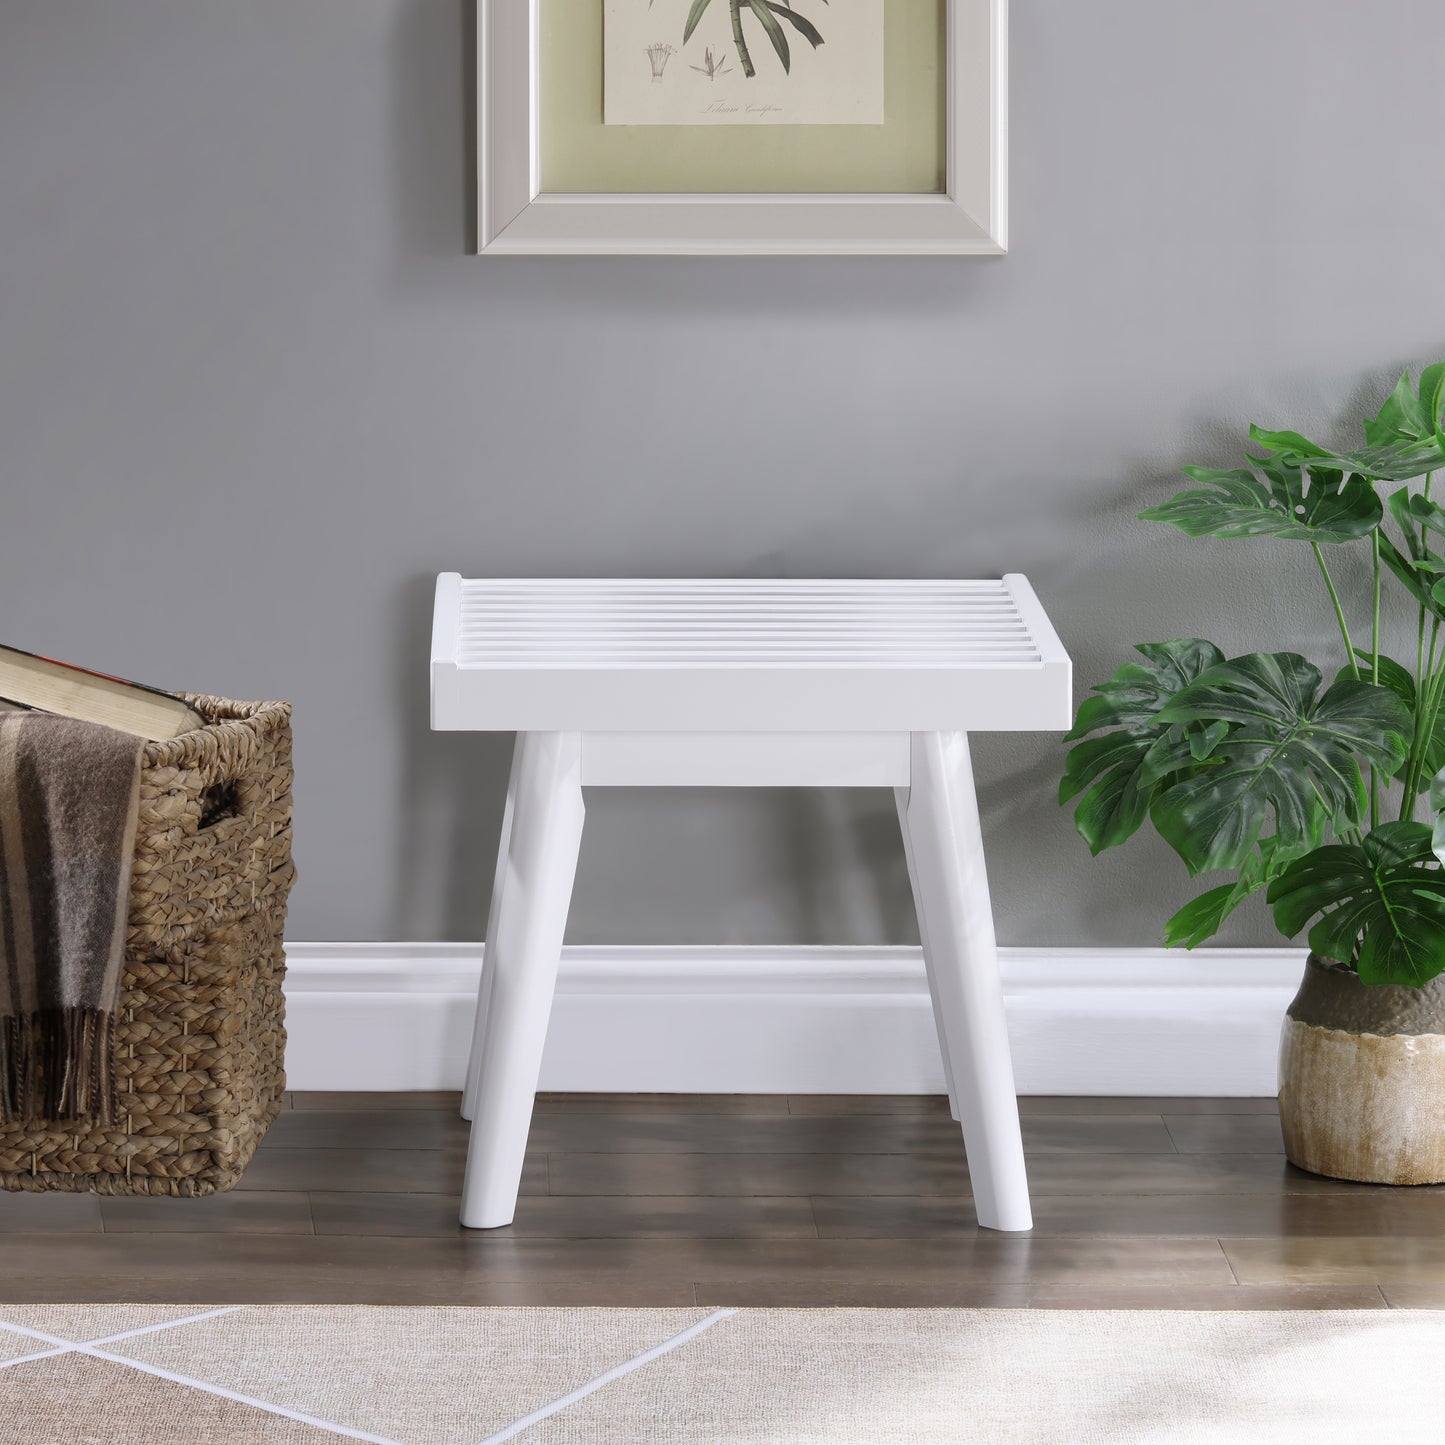 Roundhill Furniture Larwich Solid Wood Slatted Bench, 19-Inch Long, White